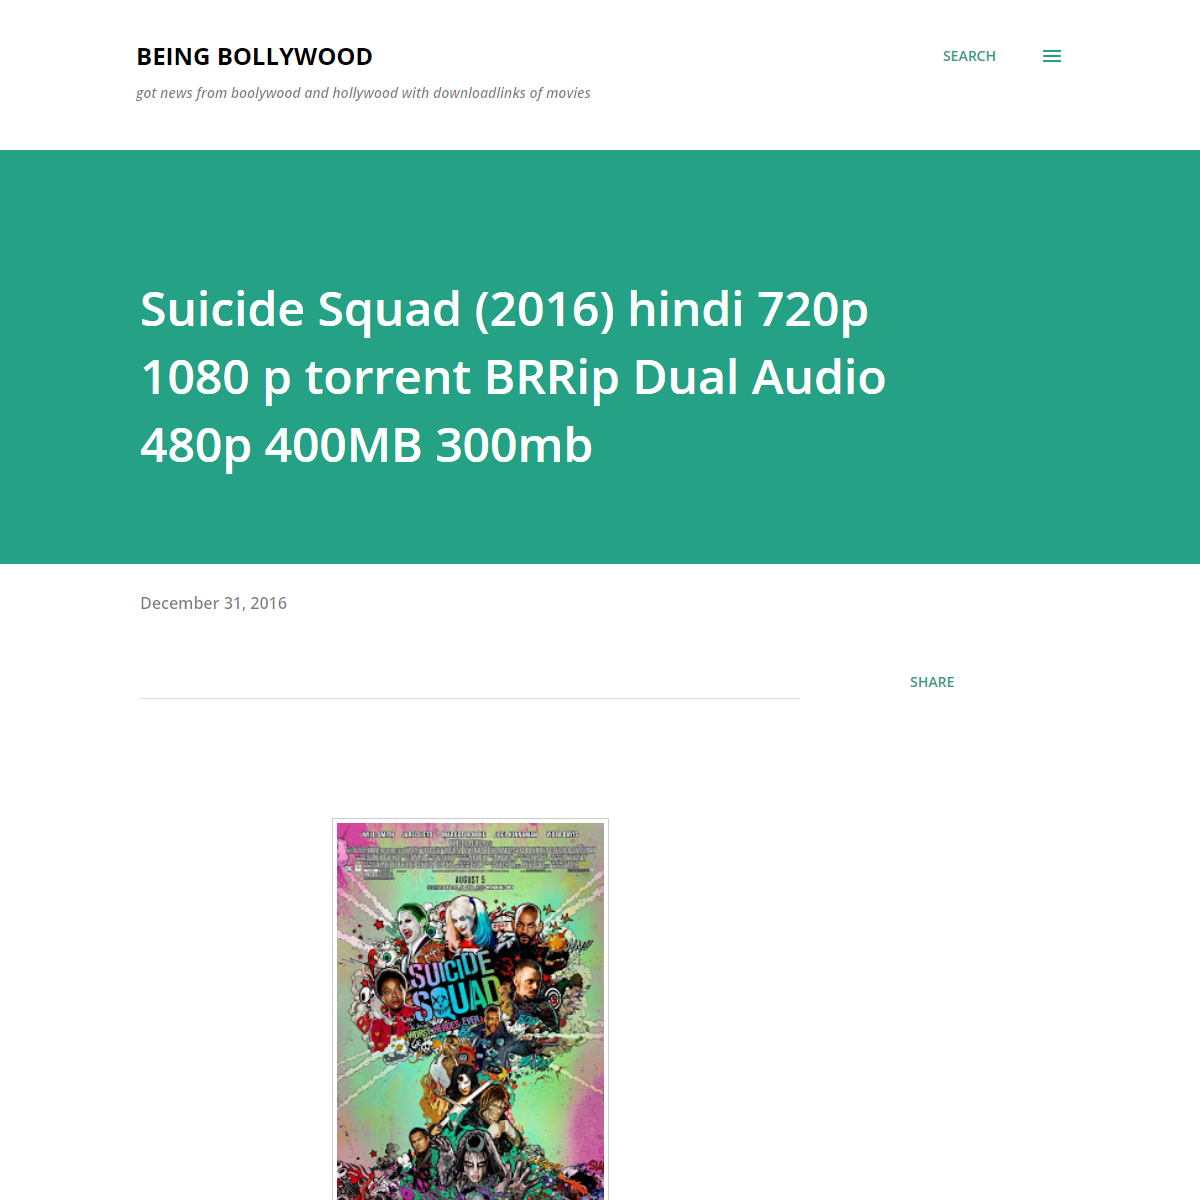 A complete backup of https://beingbollywoods.blogspot.com/2016/12/suicide-squad-2016-hindi-720p-1080-p.html